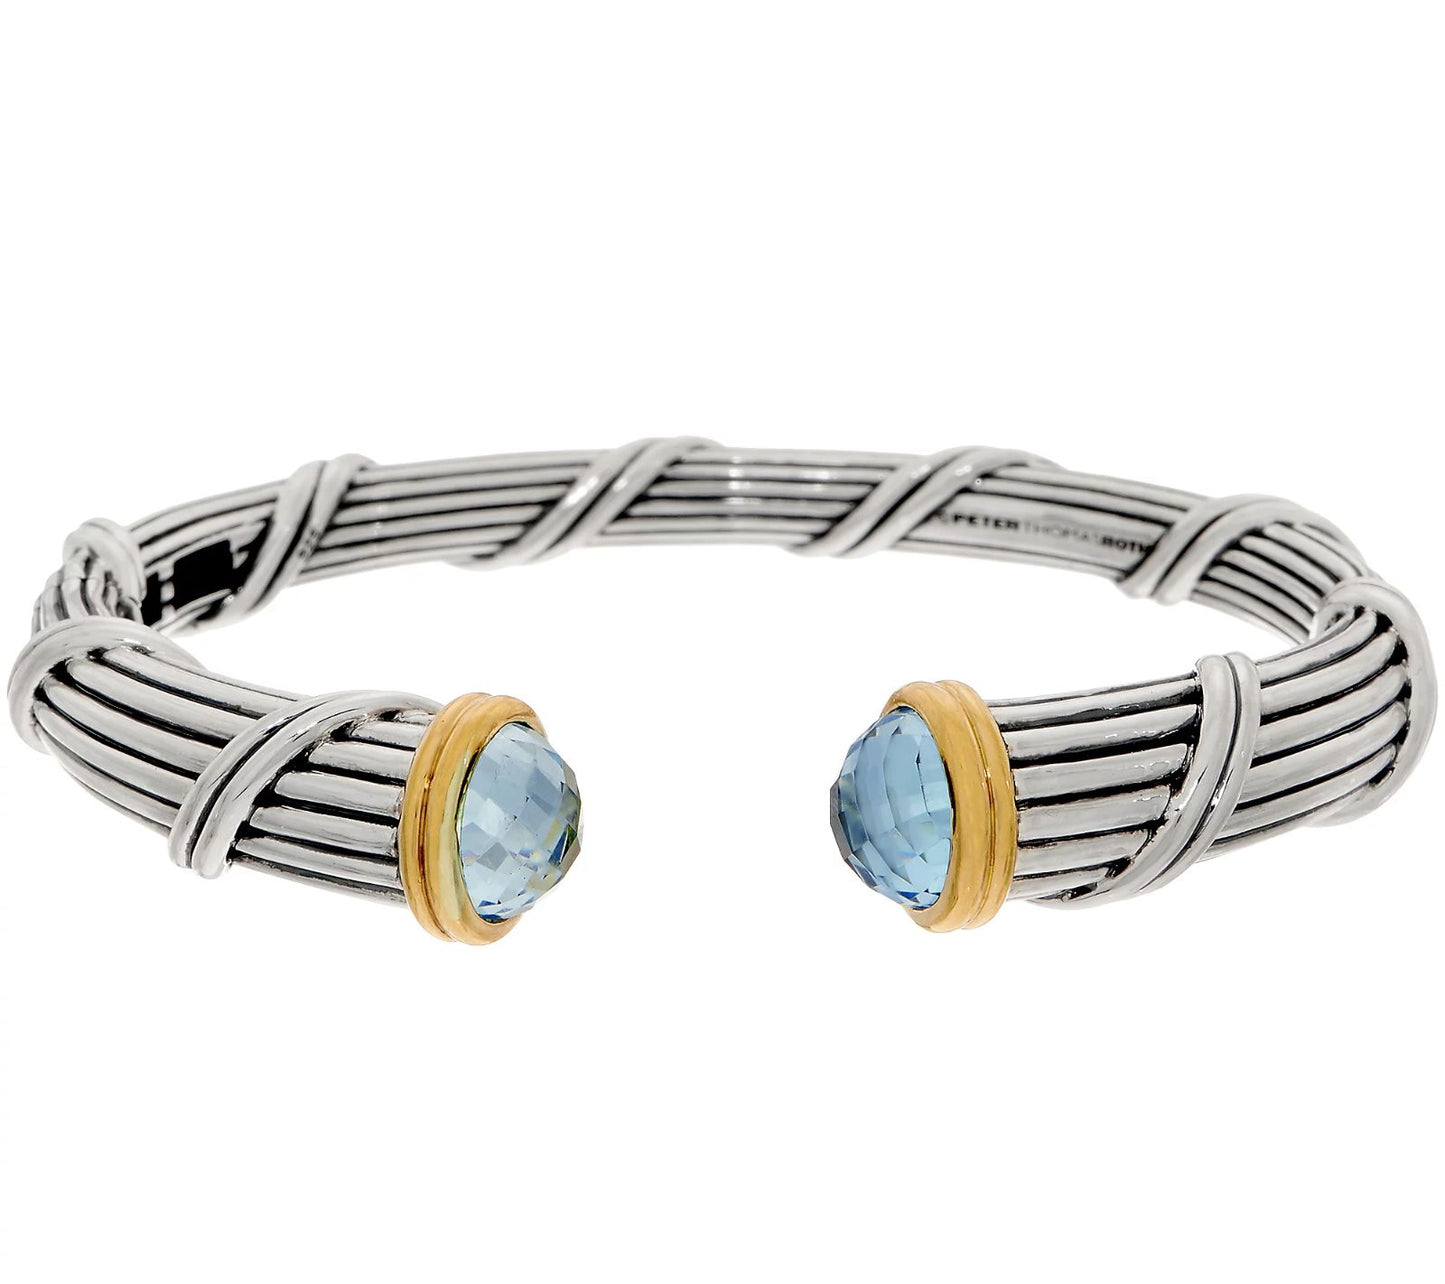 Peter Thomas Roth Sterling & 18K Clad Blue Topaz Cuff, 7-1/4"